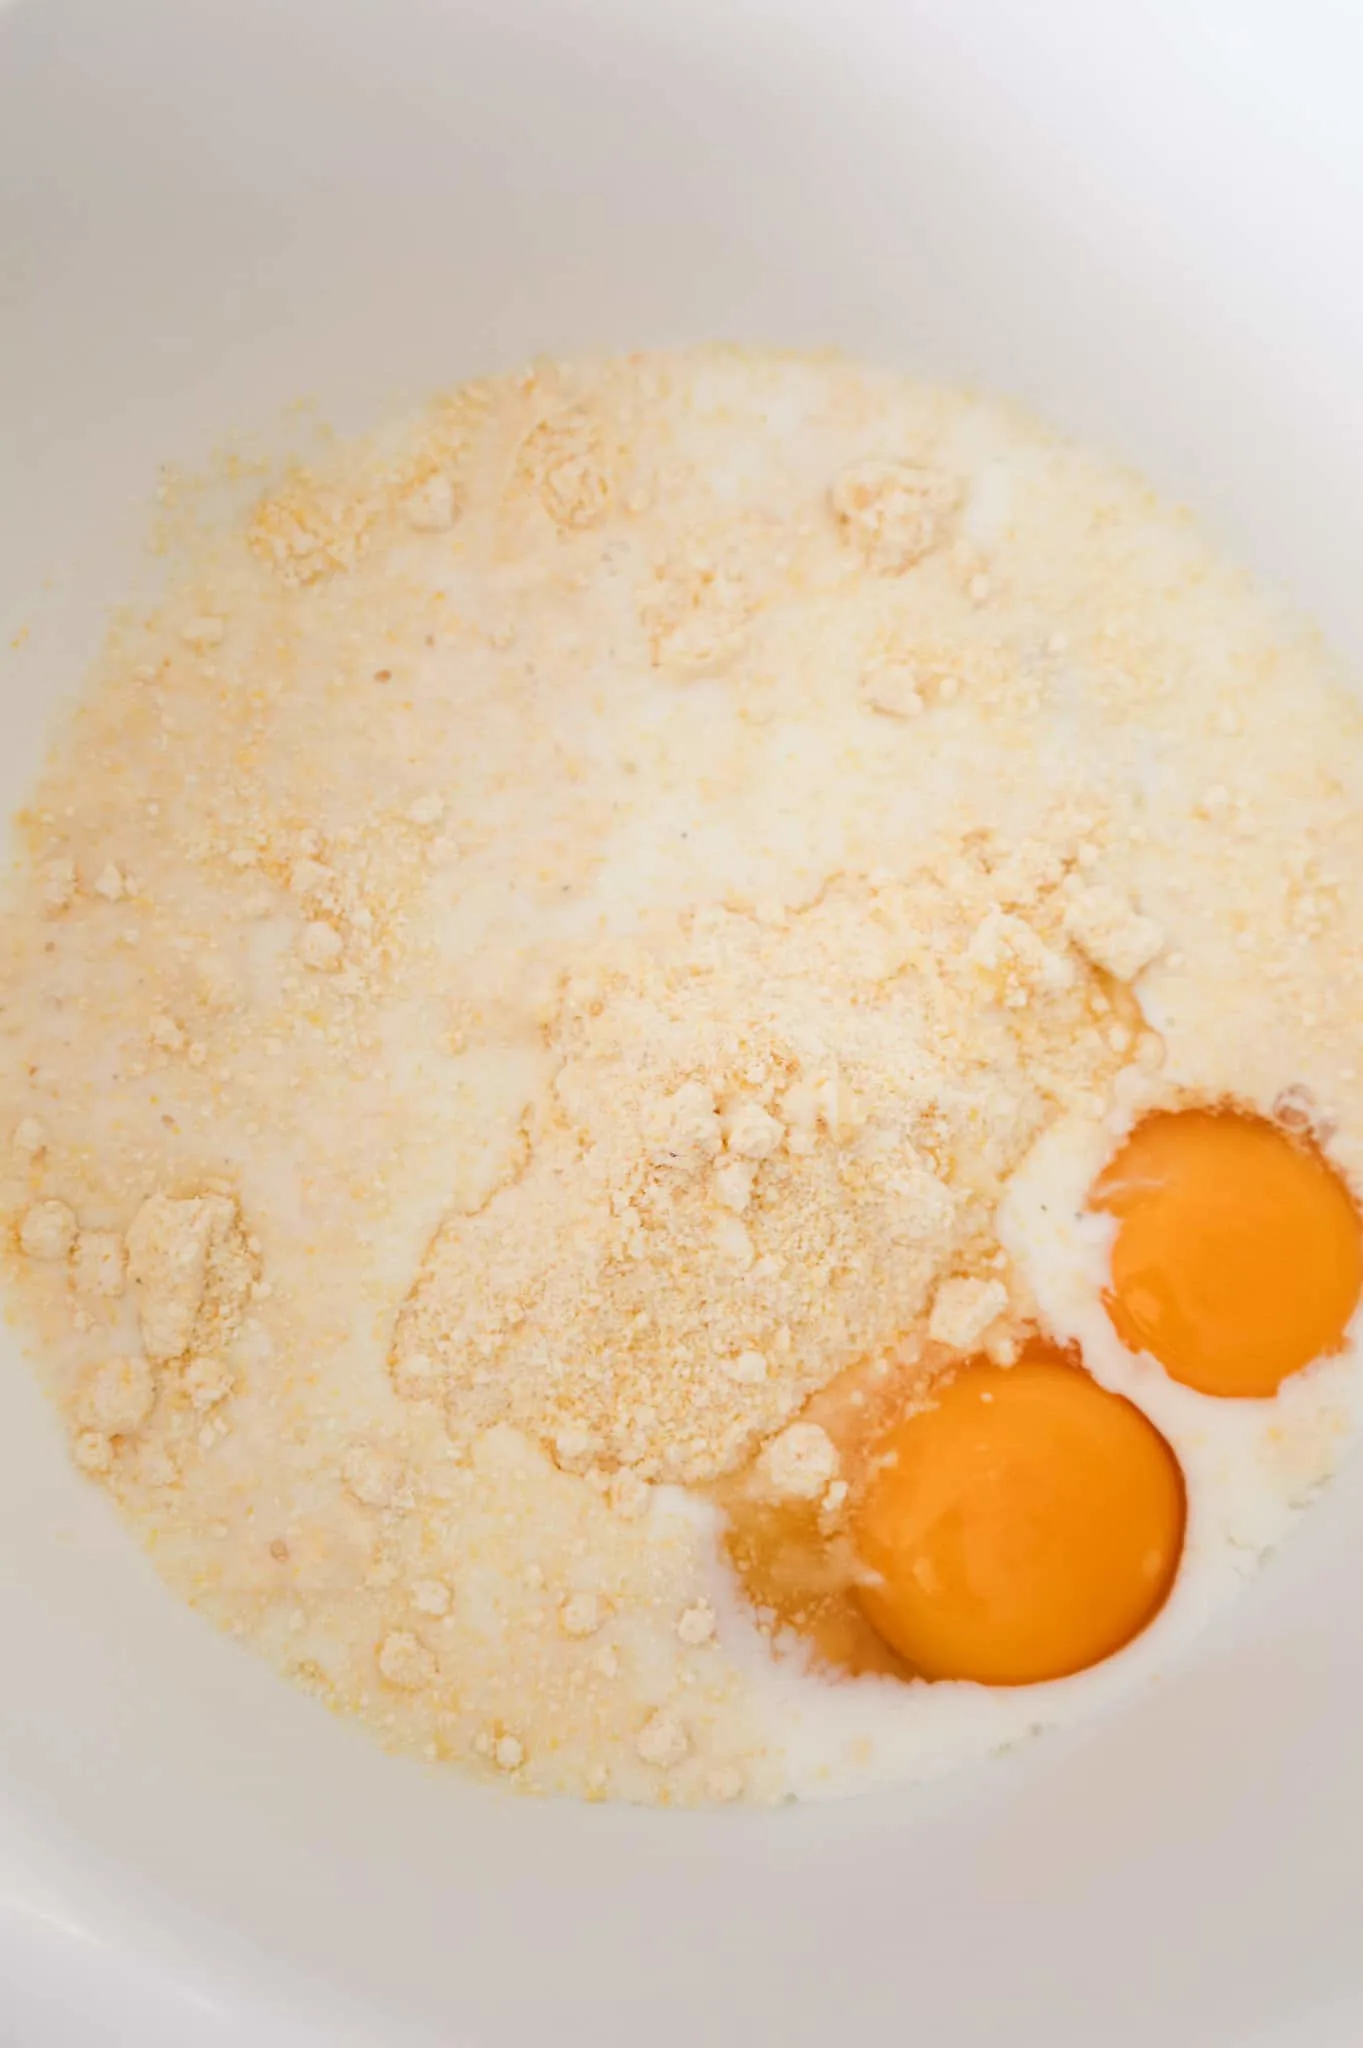 Jiffy cornbread mix, milk and eggs in a mixing bowl